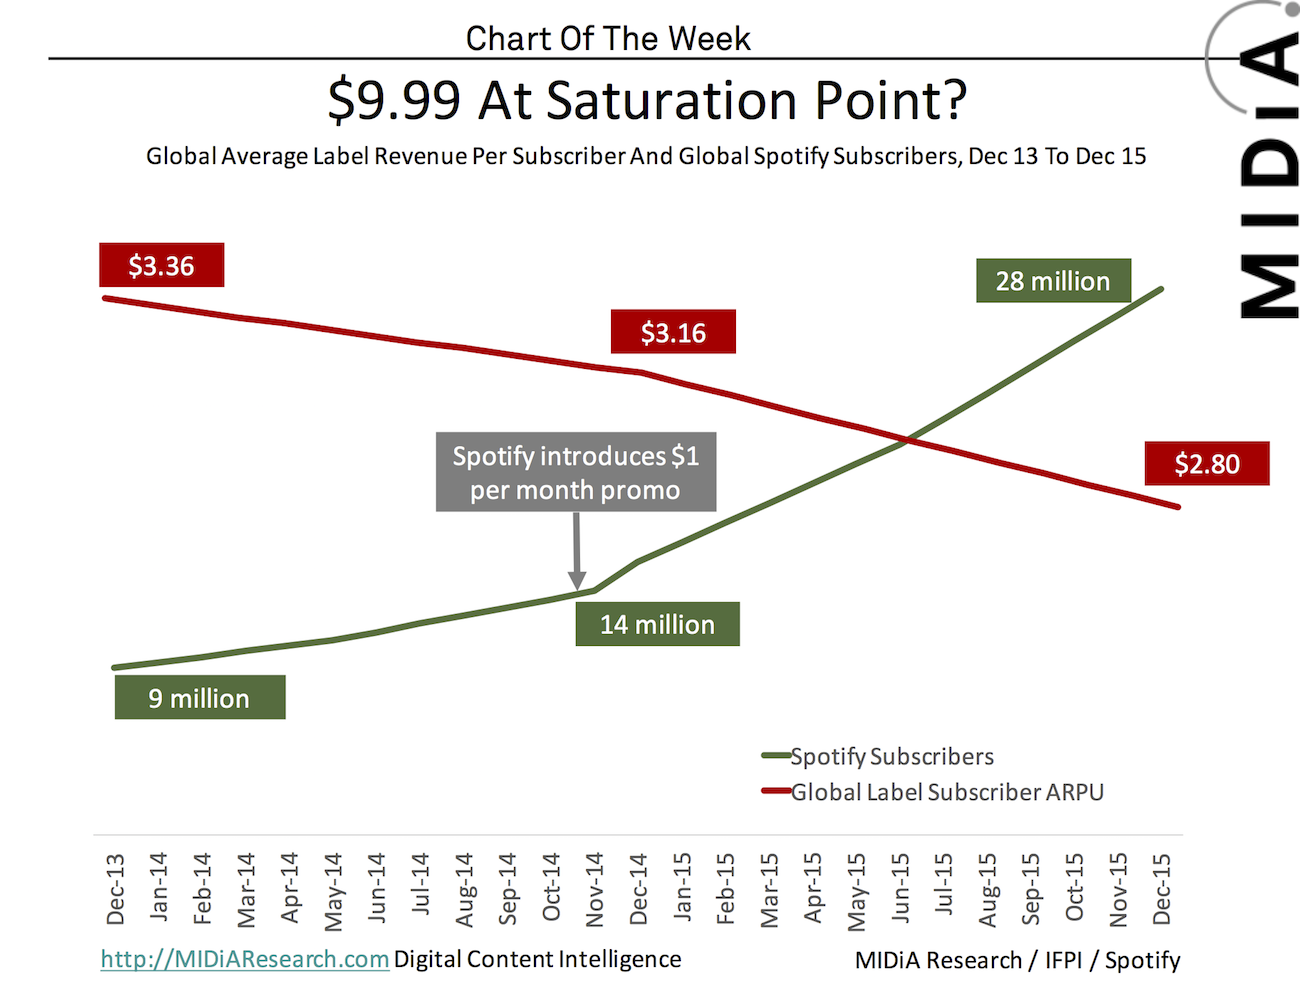 Cover image for MIDiA Chart Of The Week: 9.99 Subscriptions At Saturation Point?